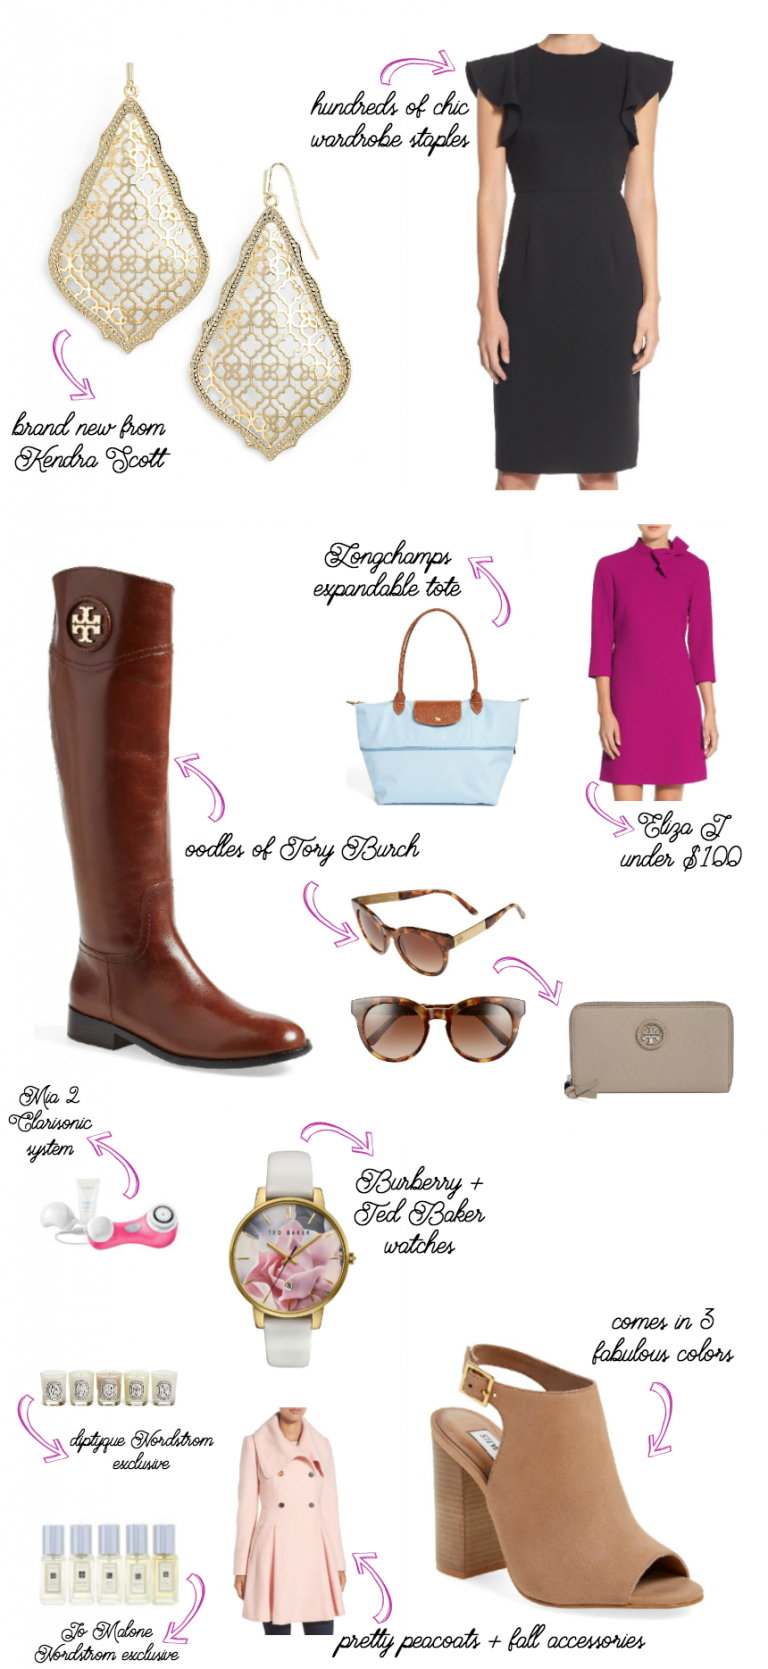 Insider Style Deals + $50 Giveaway - Diary of a Debutante